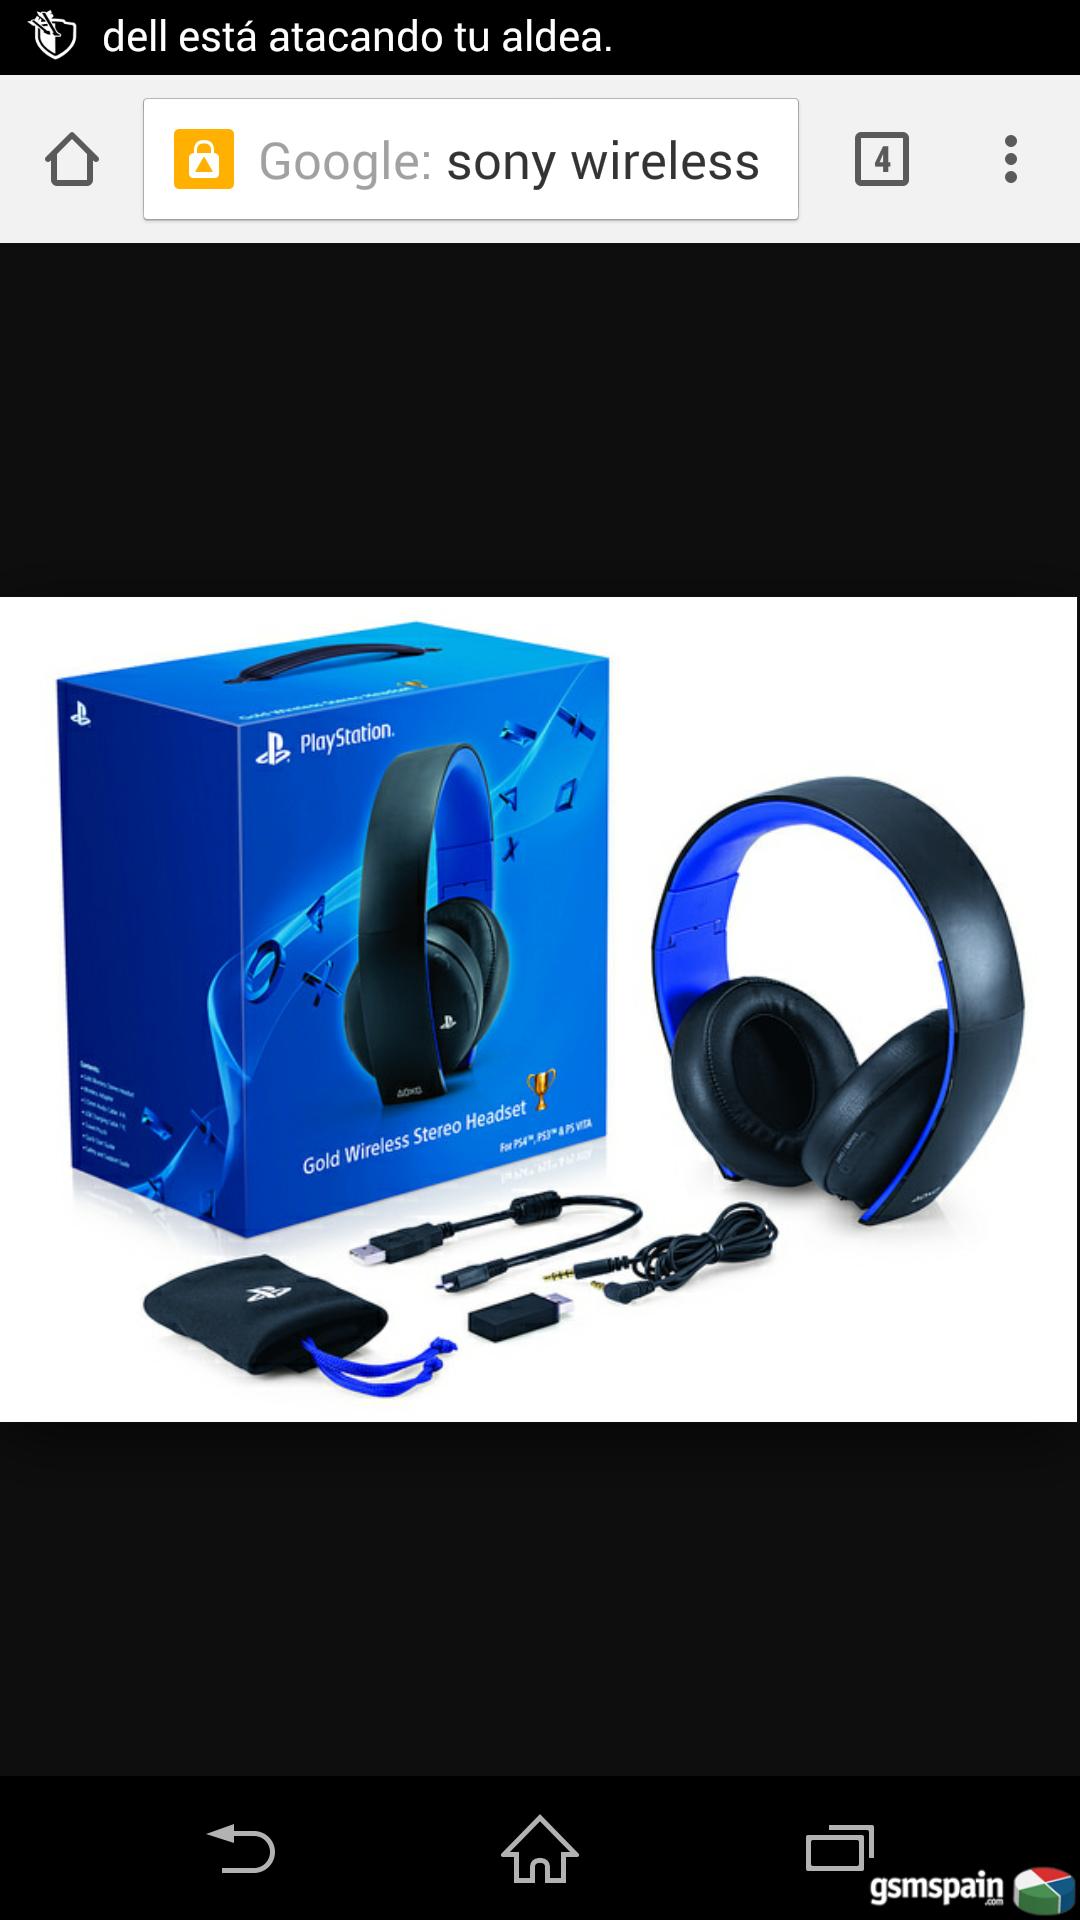 [COMPRO] Sony Wireless Stereo Headset  ps4